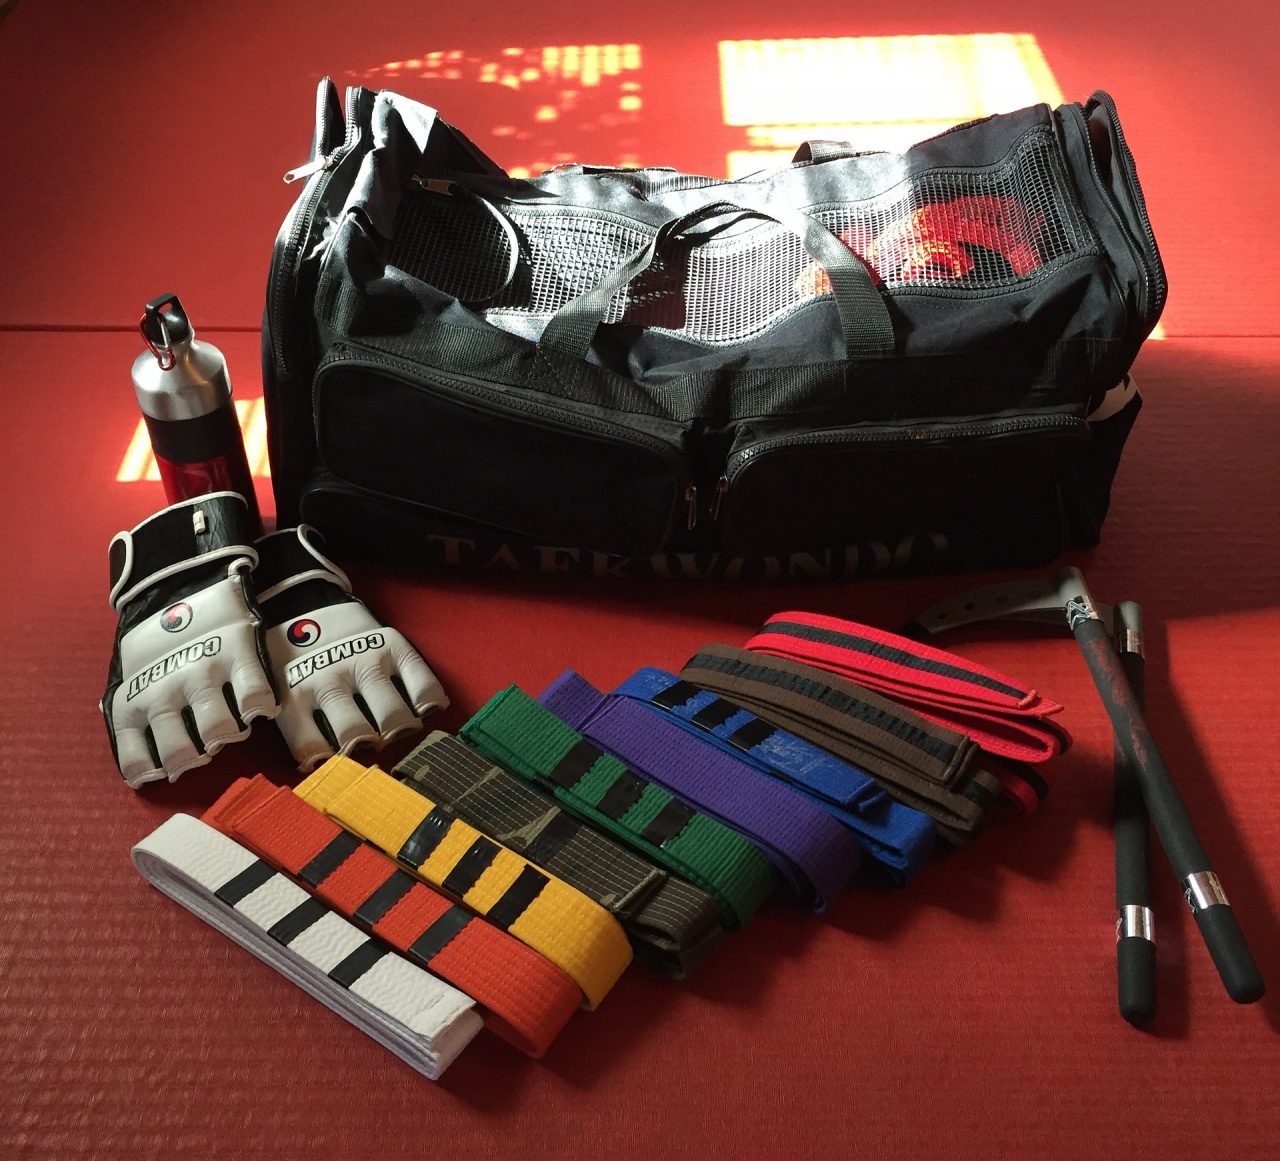 Various colored martial arts belts, sparing gear, and weaponry in front of a gym bag on red carpet